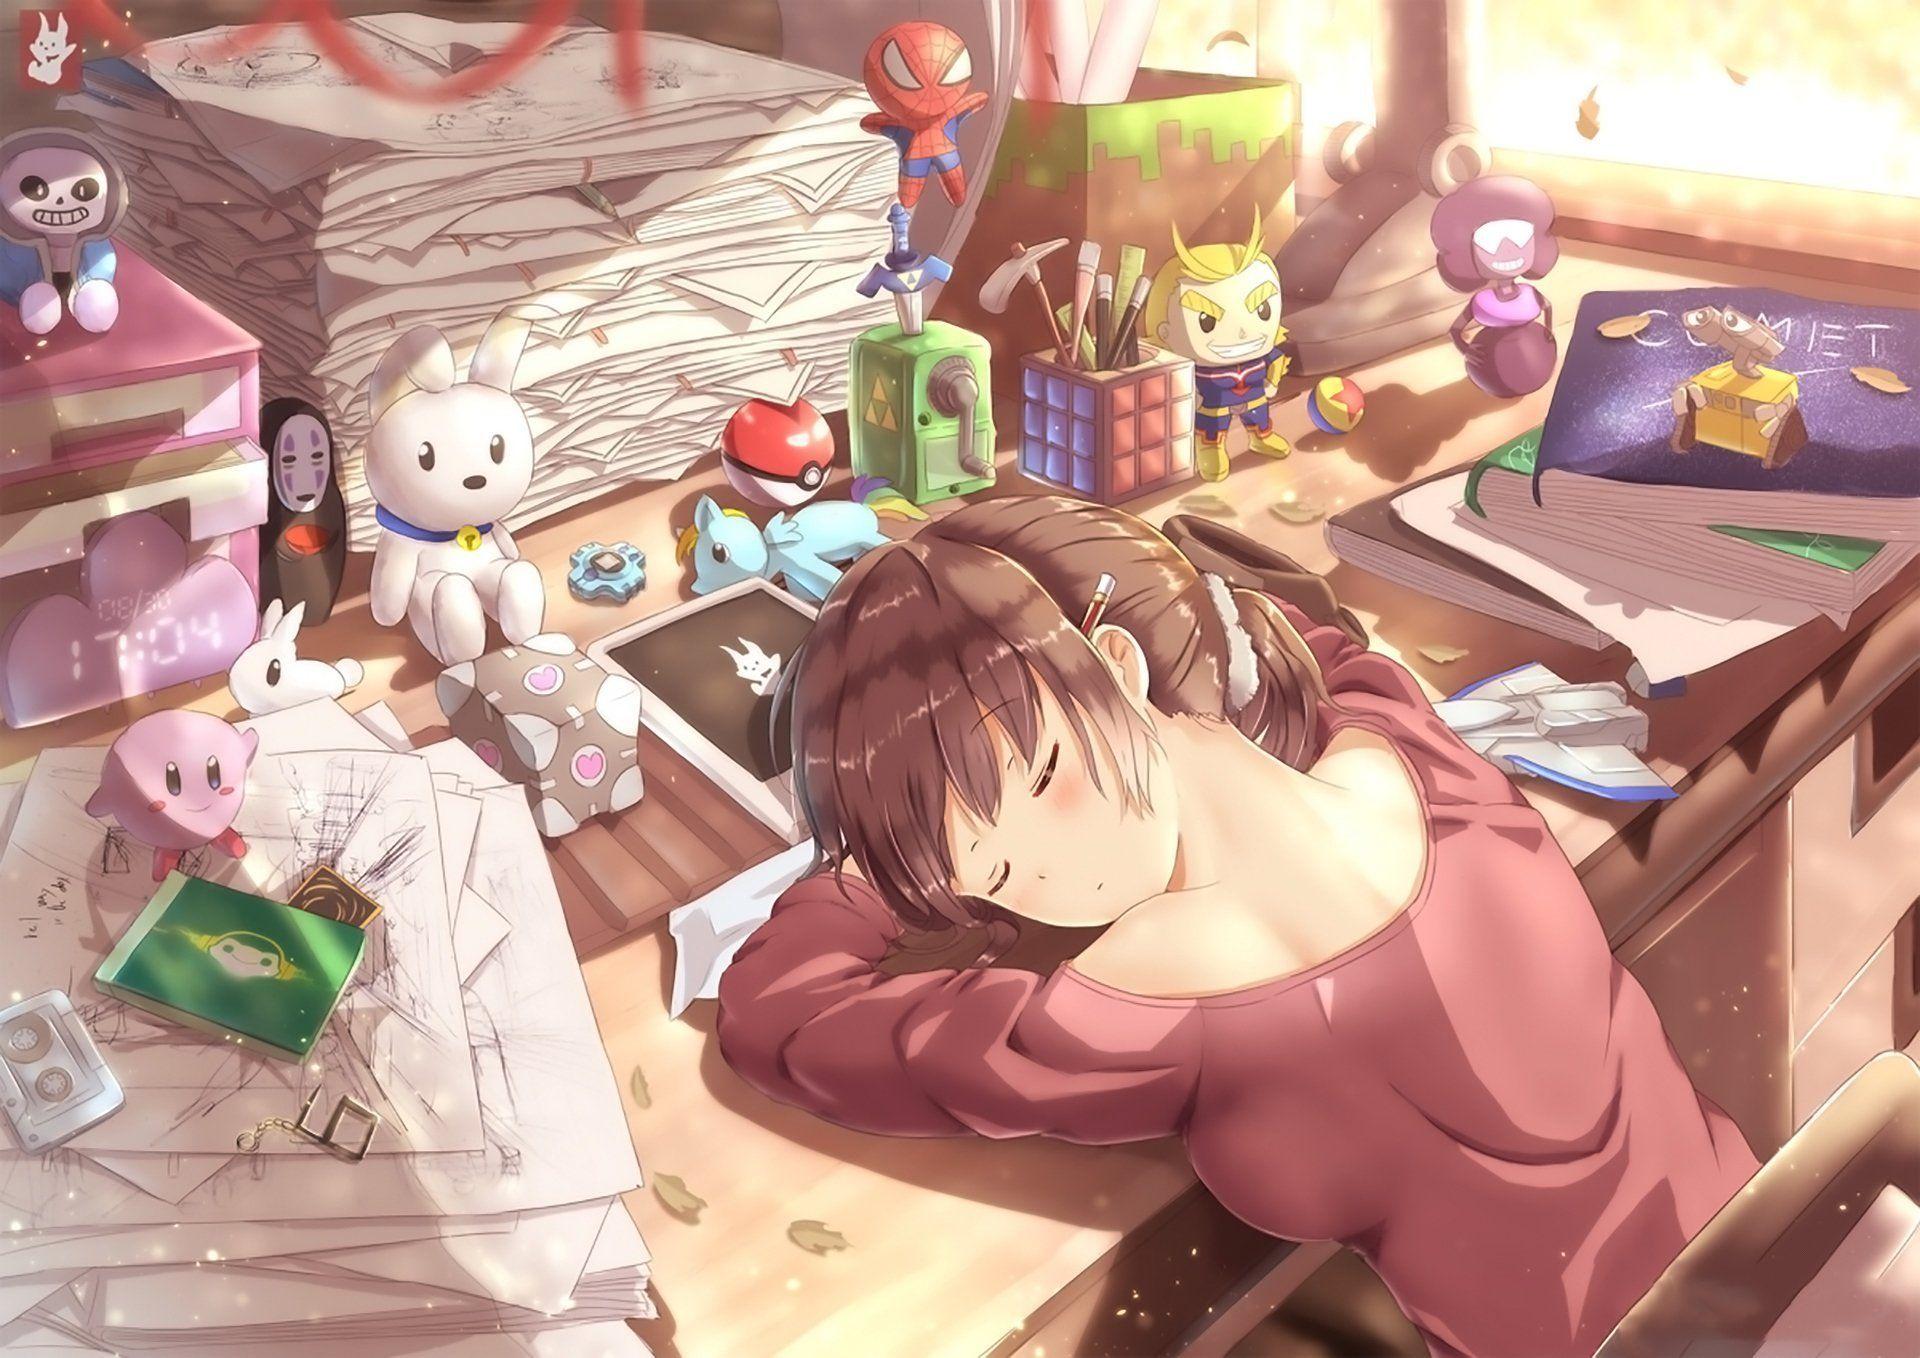 Sleeping Anime Wallpapers Top Free Sleeping Anime Backgrounds Wallpaperaccess